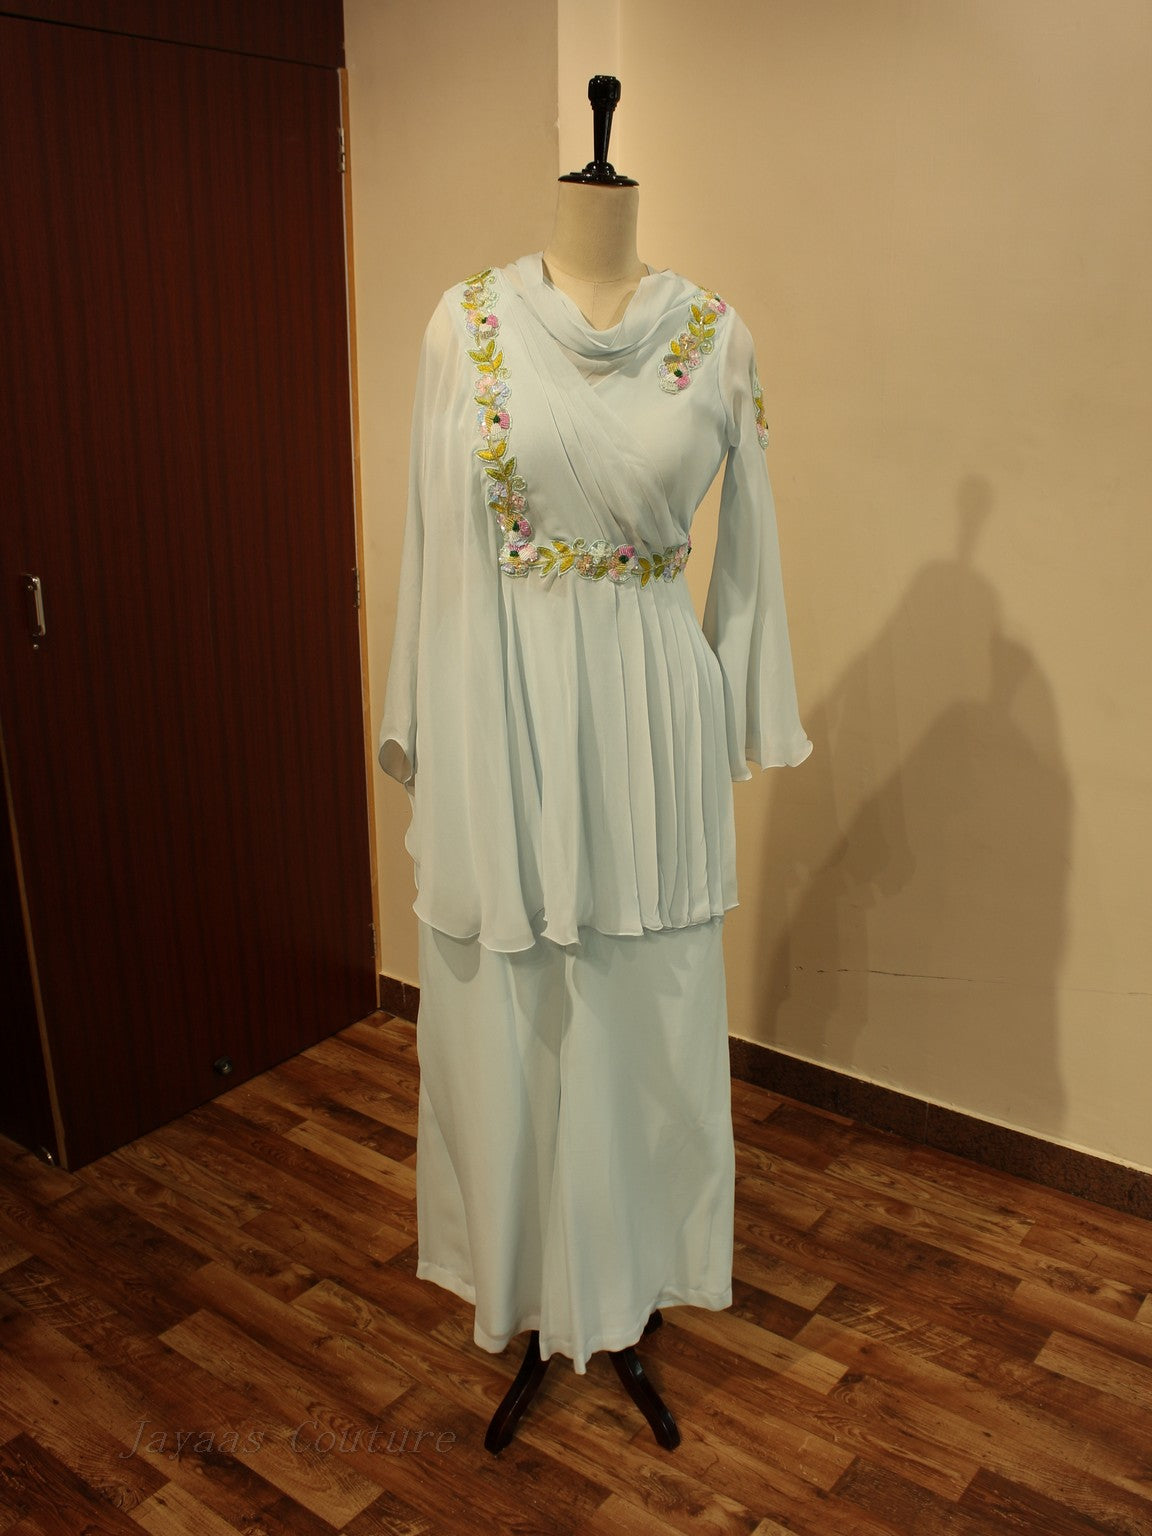 Powder blue Drape top with flaired pants